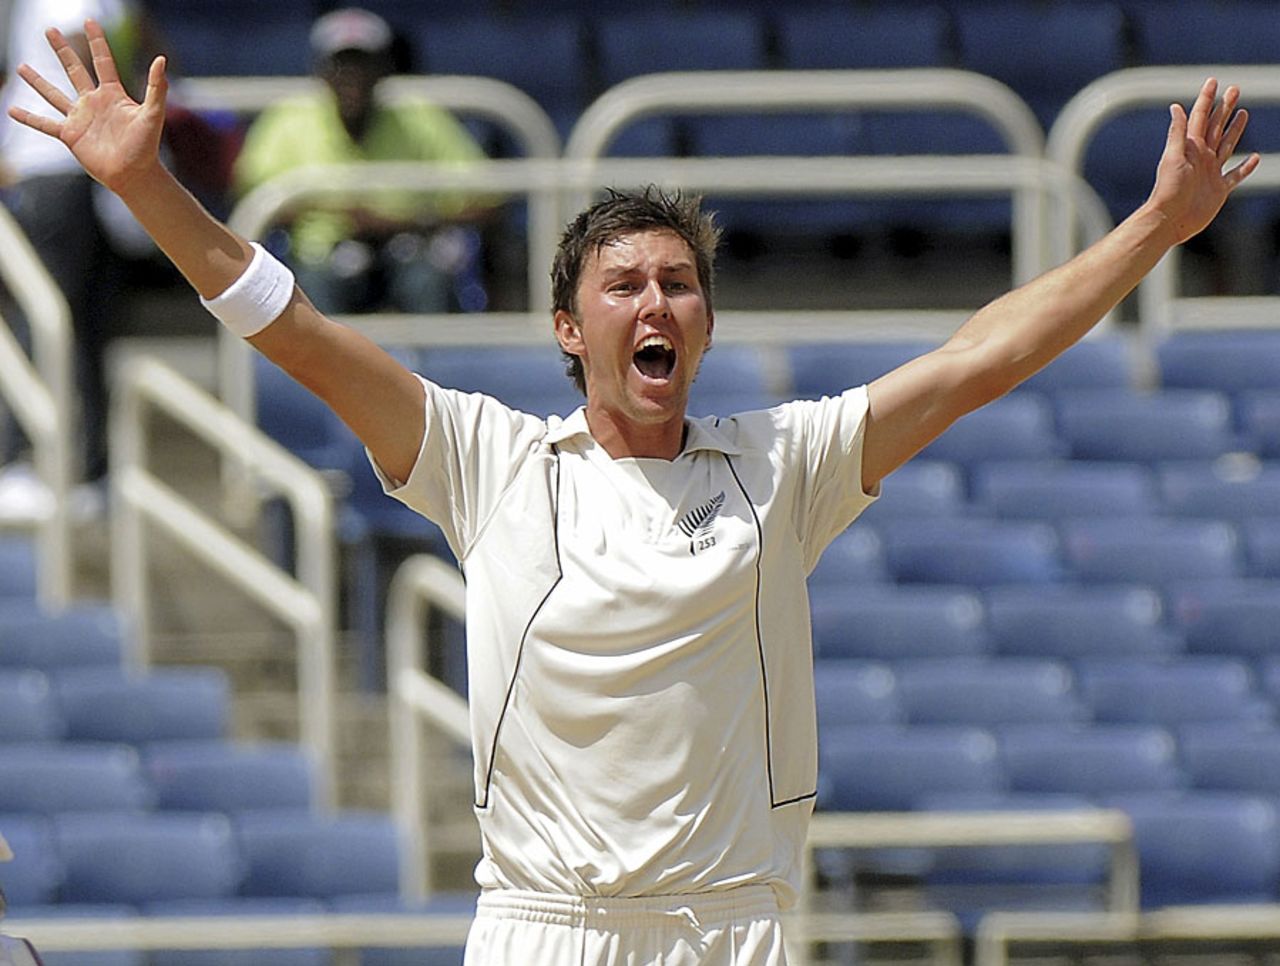 Trent Boult bowled a testing spell before lunch, West Indies v New Zealand, 2nd Test, Jamaica, 2nd day, August 3, 2012